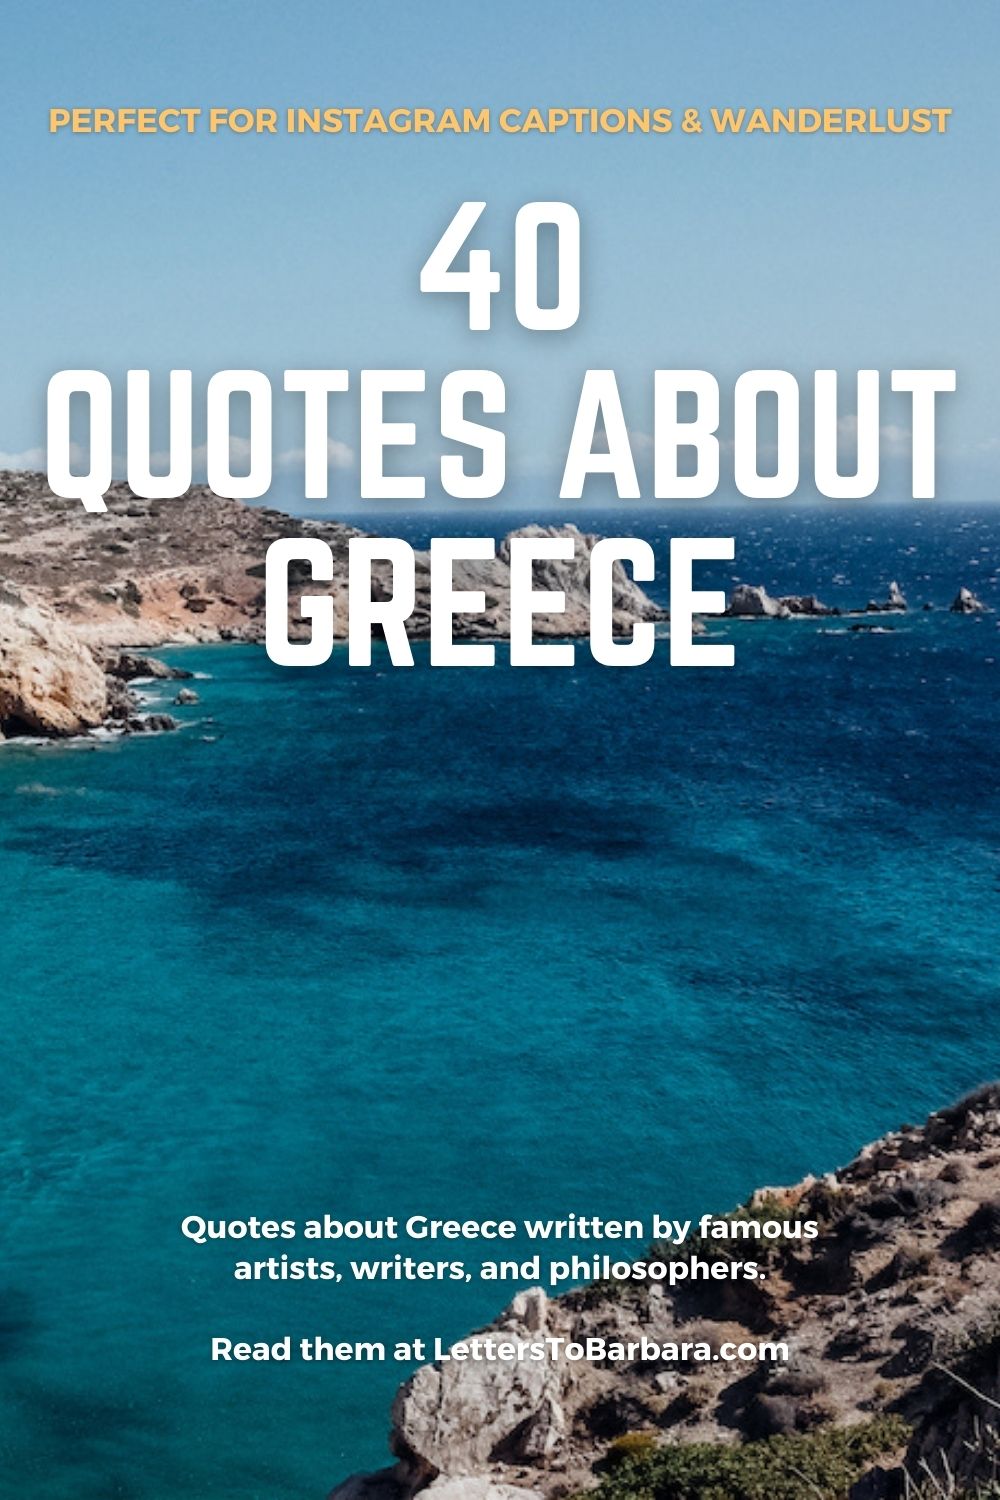 Quotes about Greece to feed your wanderlust